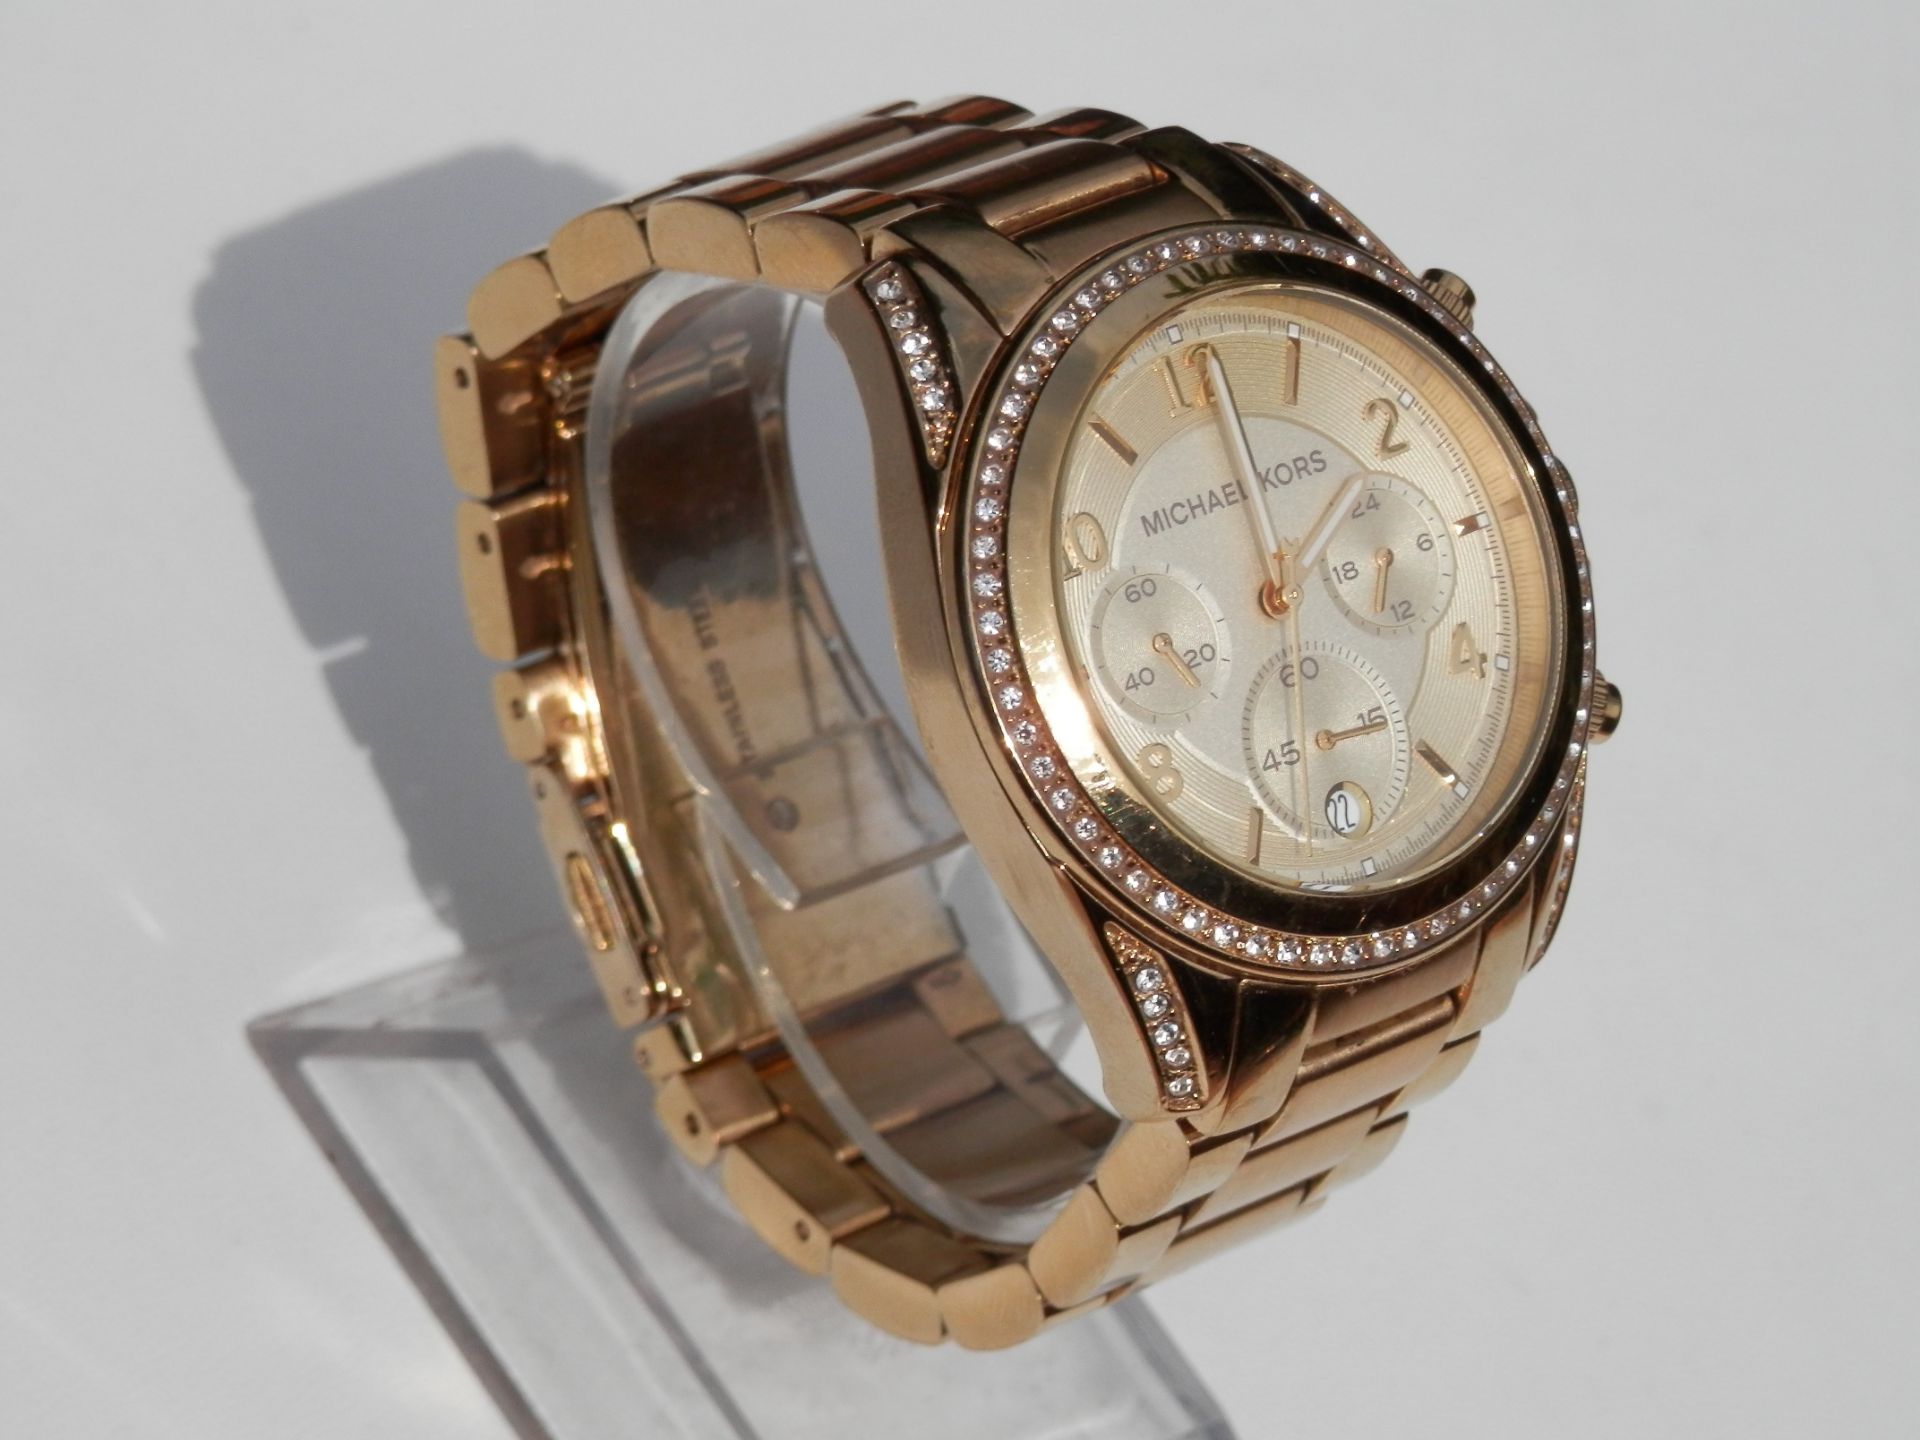 RRP £240. SUPERB LADIES MICHAEL KORS FULL STAINLESS GOLD PLATED DIAMANTE ENCRUSTED CHRONO DATE WATCH - Image 4 of 16